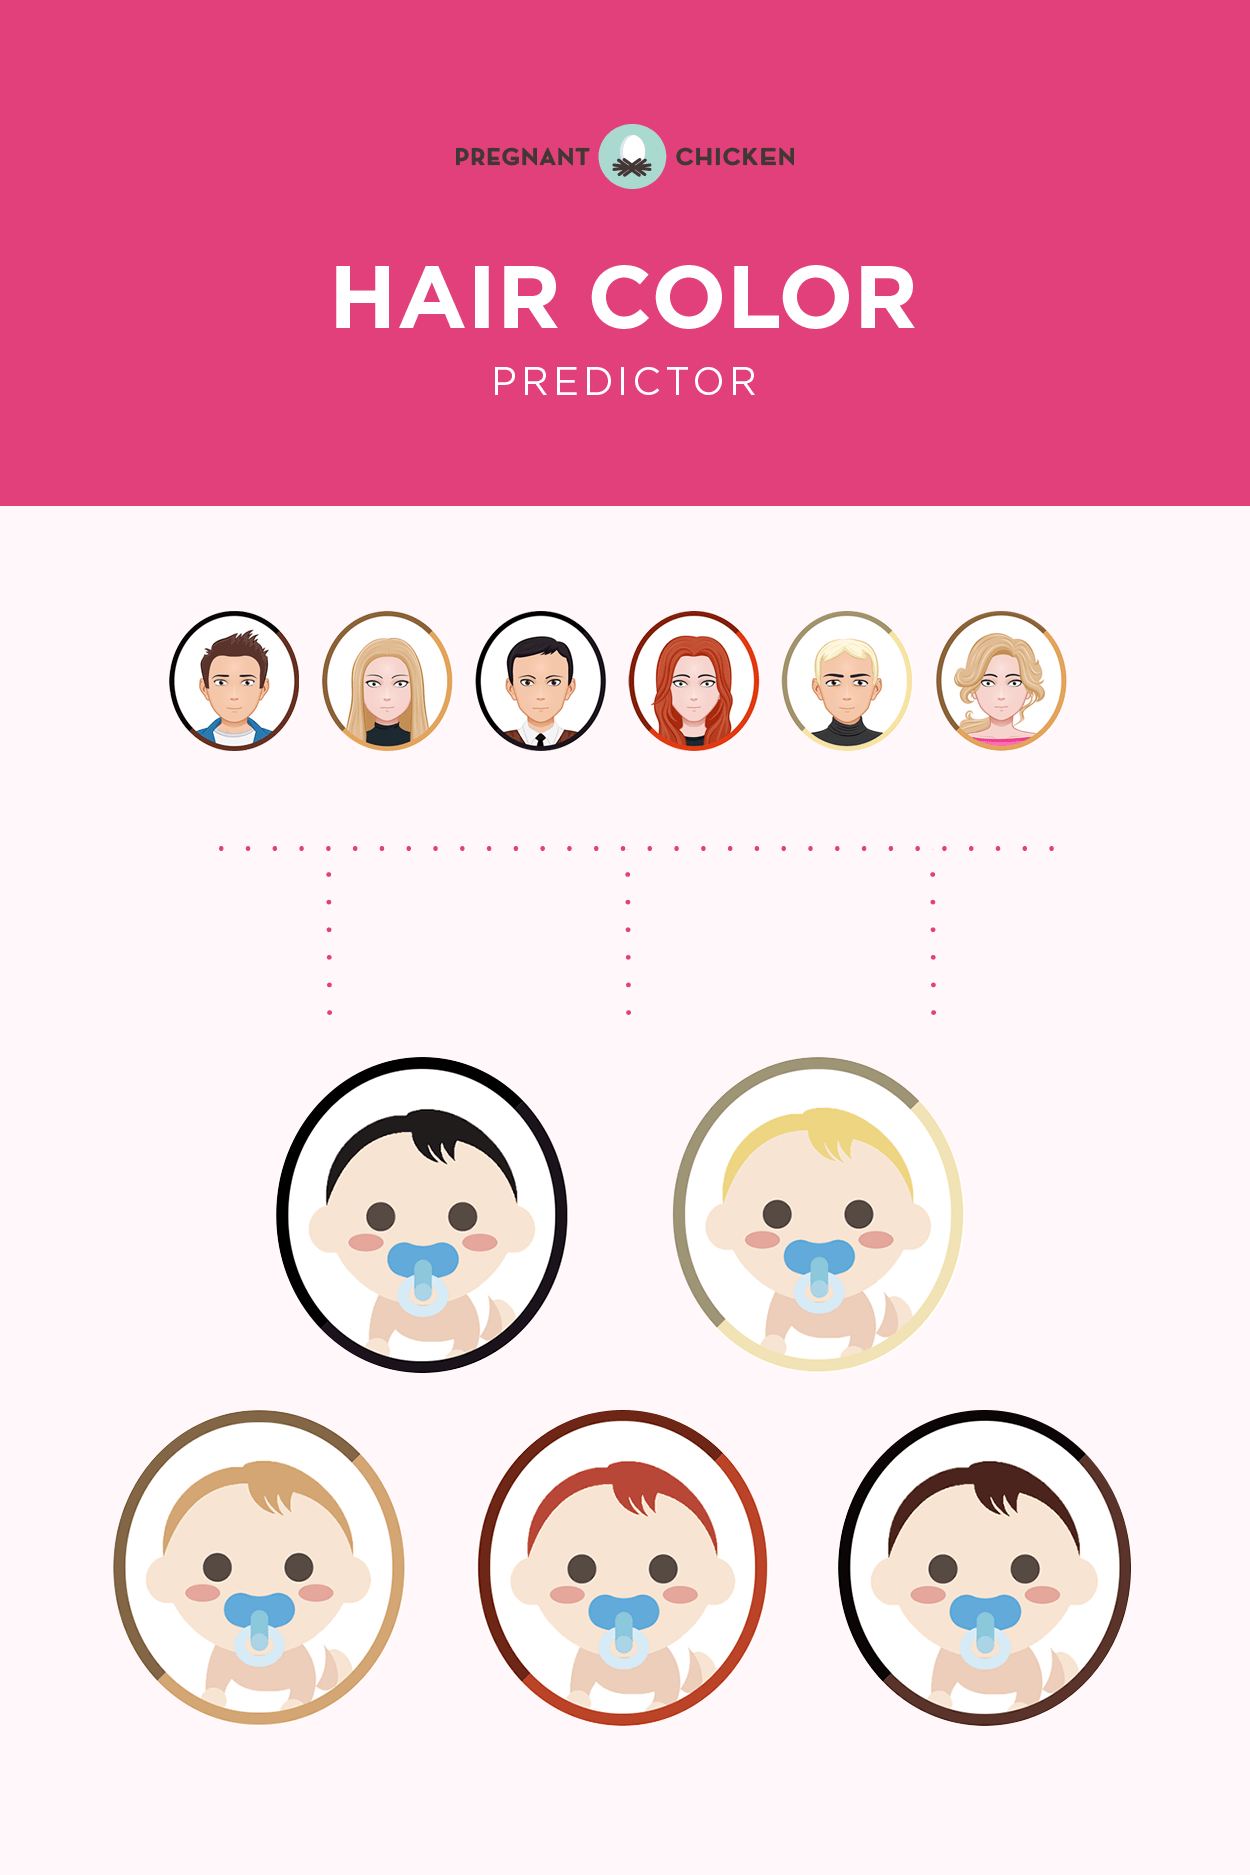 Baby Hair Color PredictorUse this fun baby hair color predictor tool to find out what the genetic probability is that your child will have a certain color of lovely locks. Let me know if it guessed correctly for your baby!